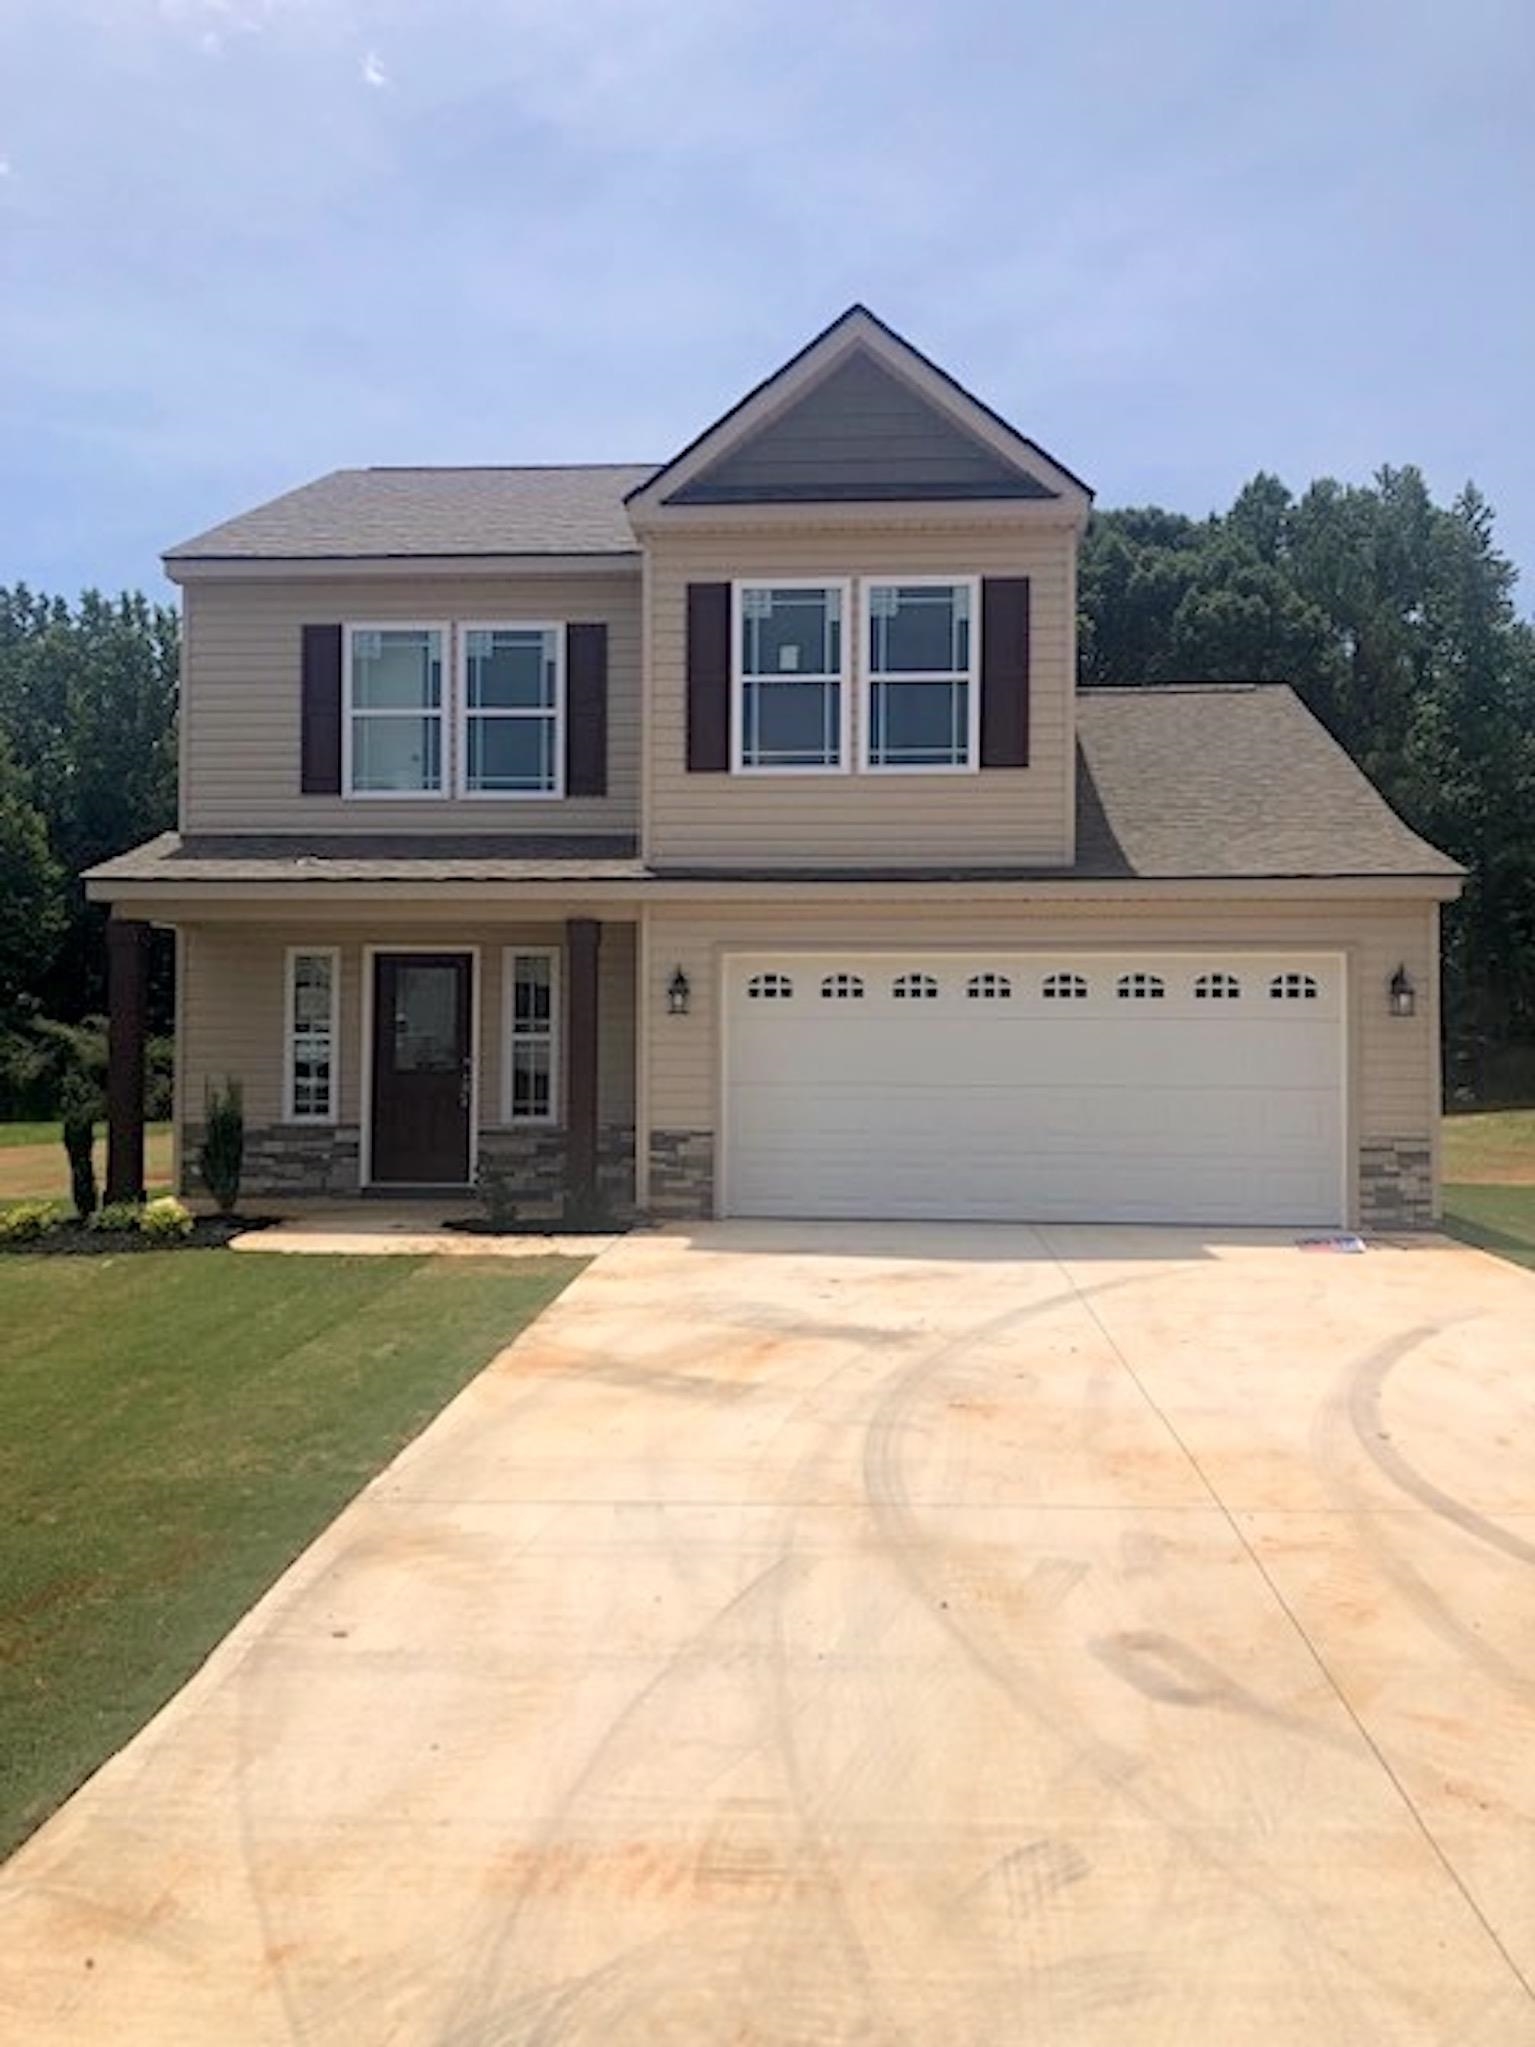 MOVE IN READY!! This 2 story 3br/2.5ba home features a gas fireplace, granite counter tops, 12'x12' covered patio and much more. Steuer Place is a new community with 100% financing available! This home is a must-see!  Preferred Lender/Attorney Closing Costs Incentive Offered!  1/2 acre Lot.